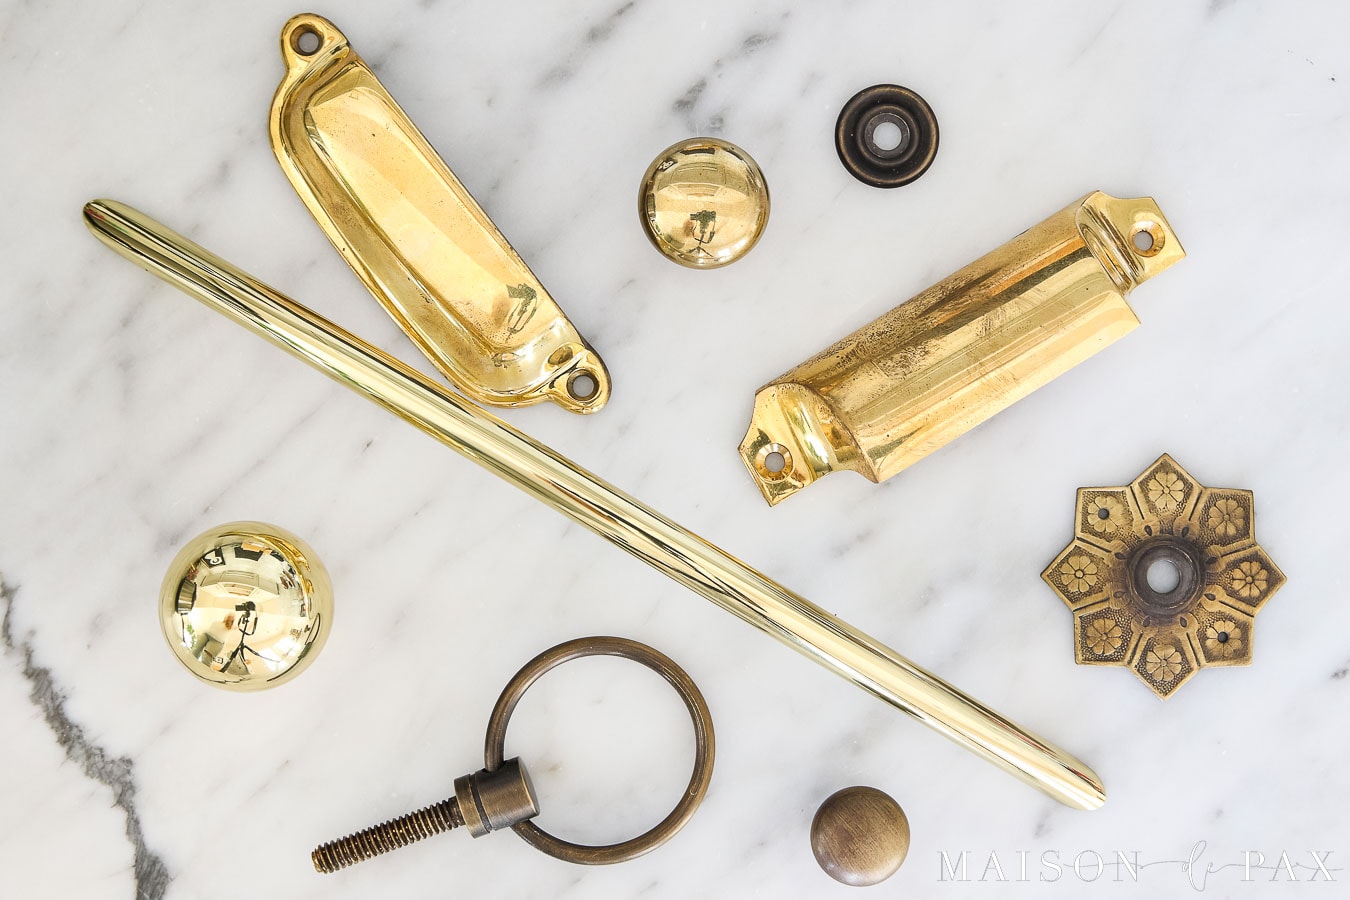 unlaquered brass hardware ages beautifully